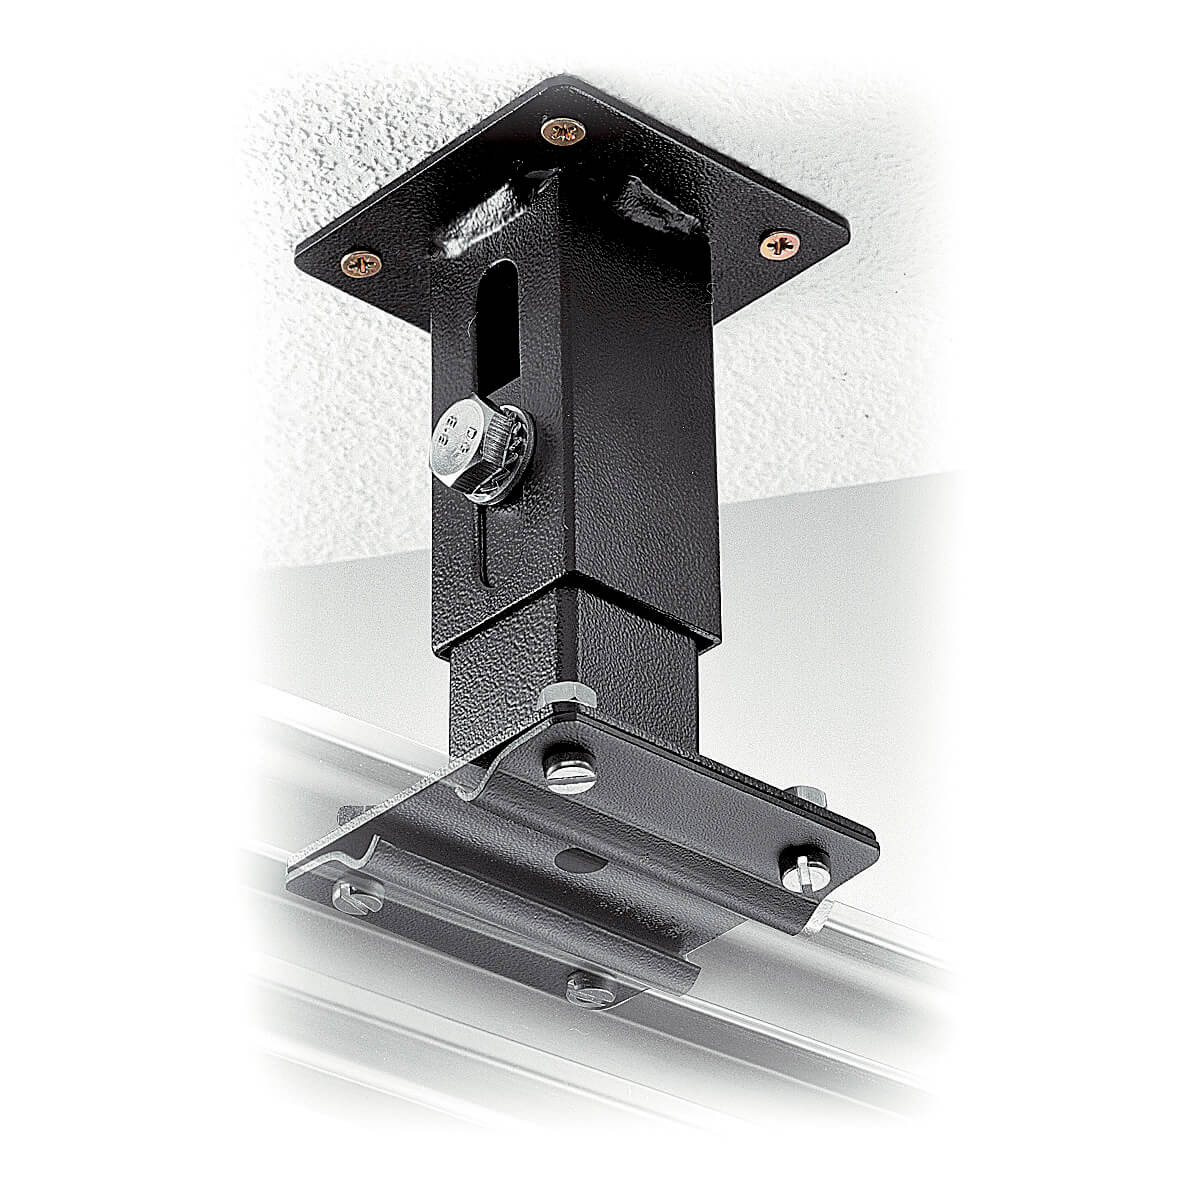 Ceiling-Mount adjustable Rail s Sky Track System 3215A, 10 c